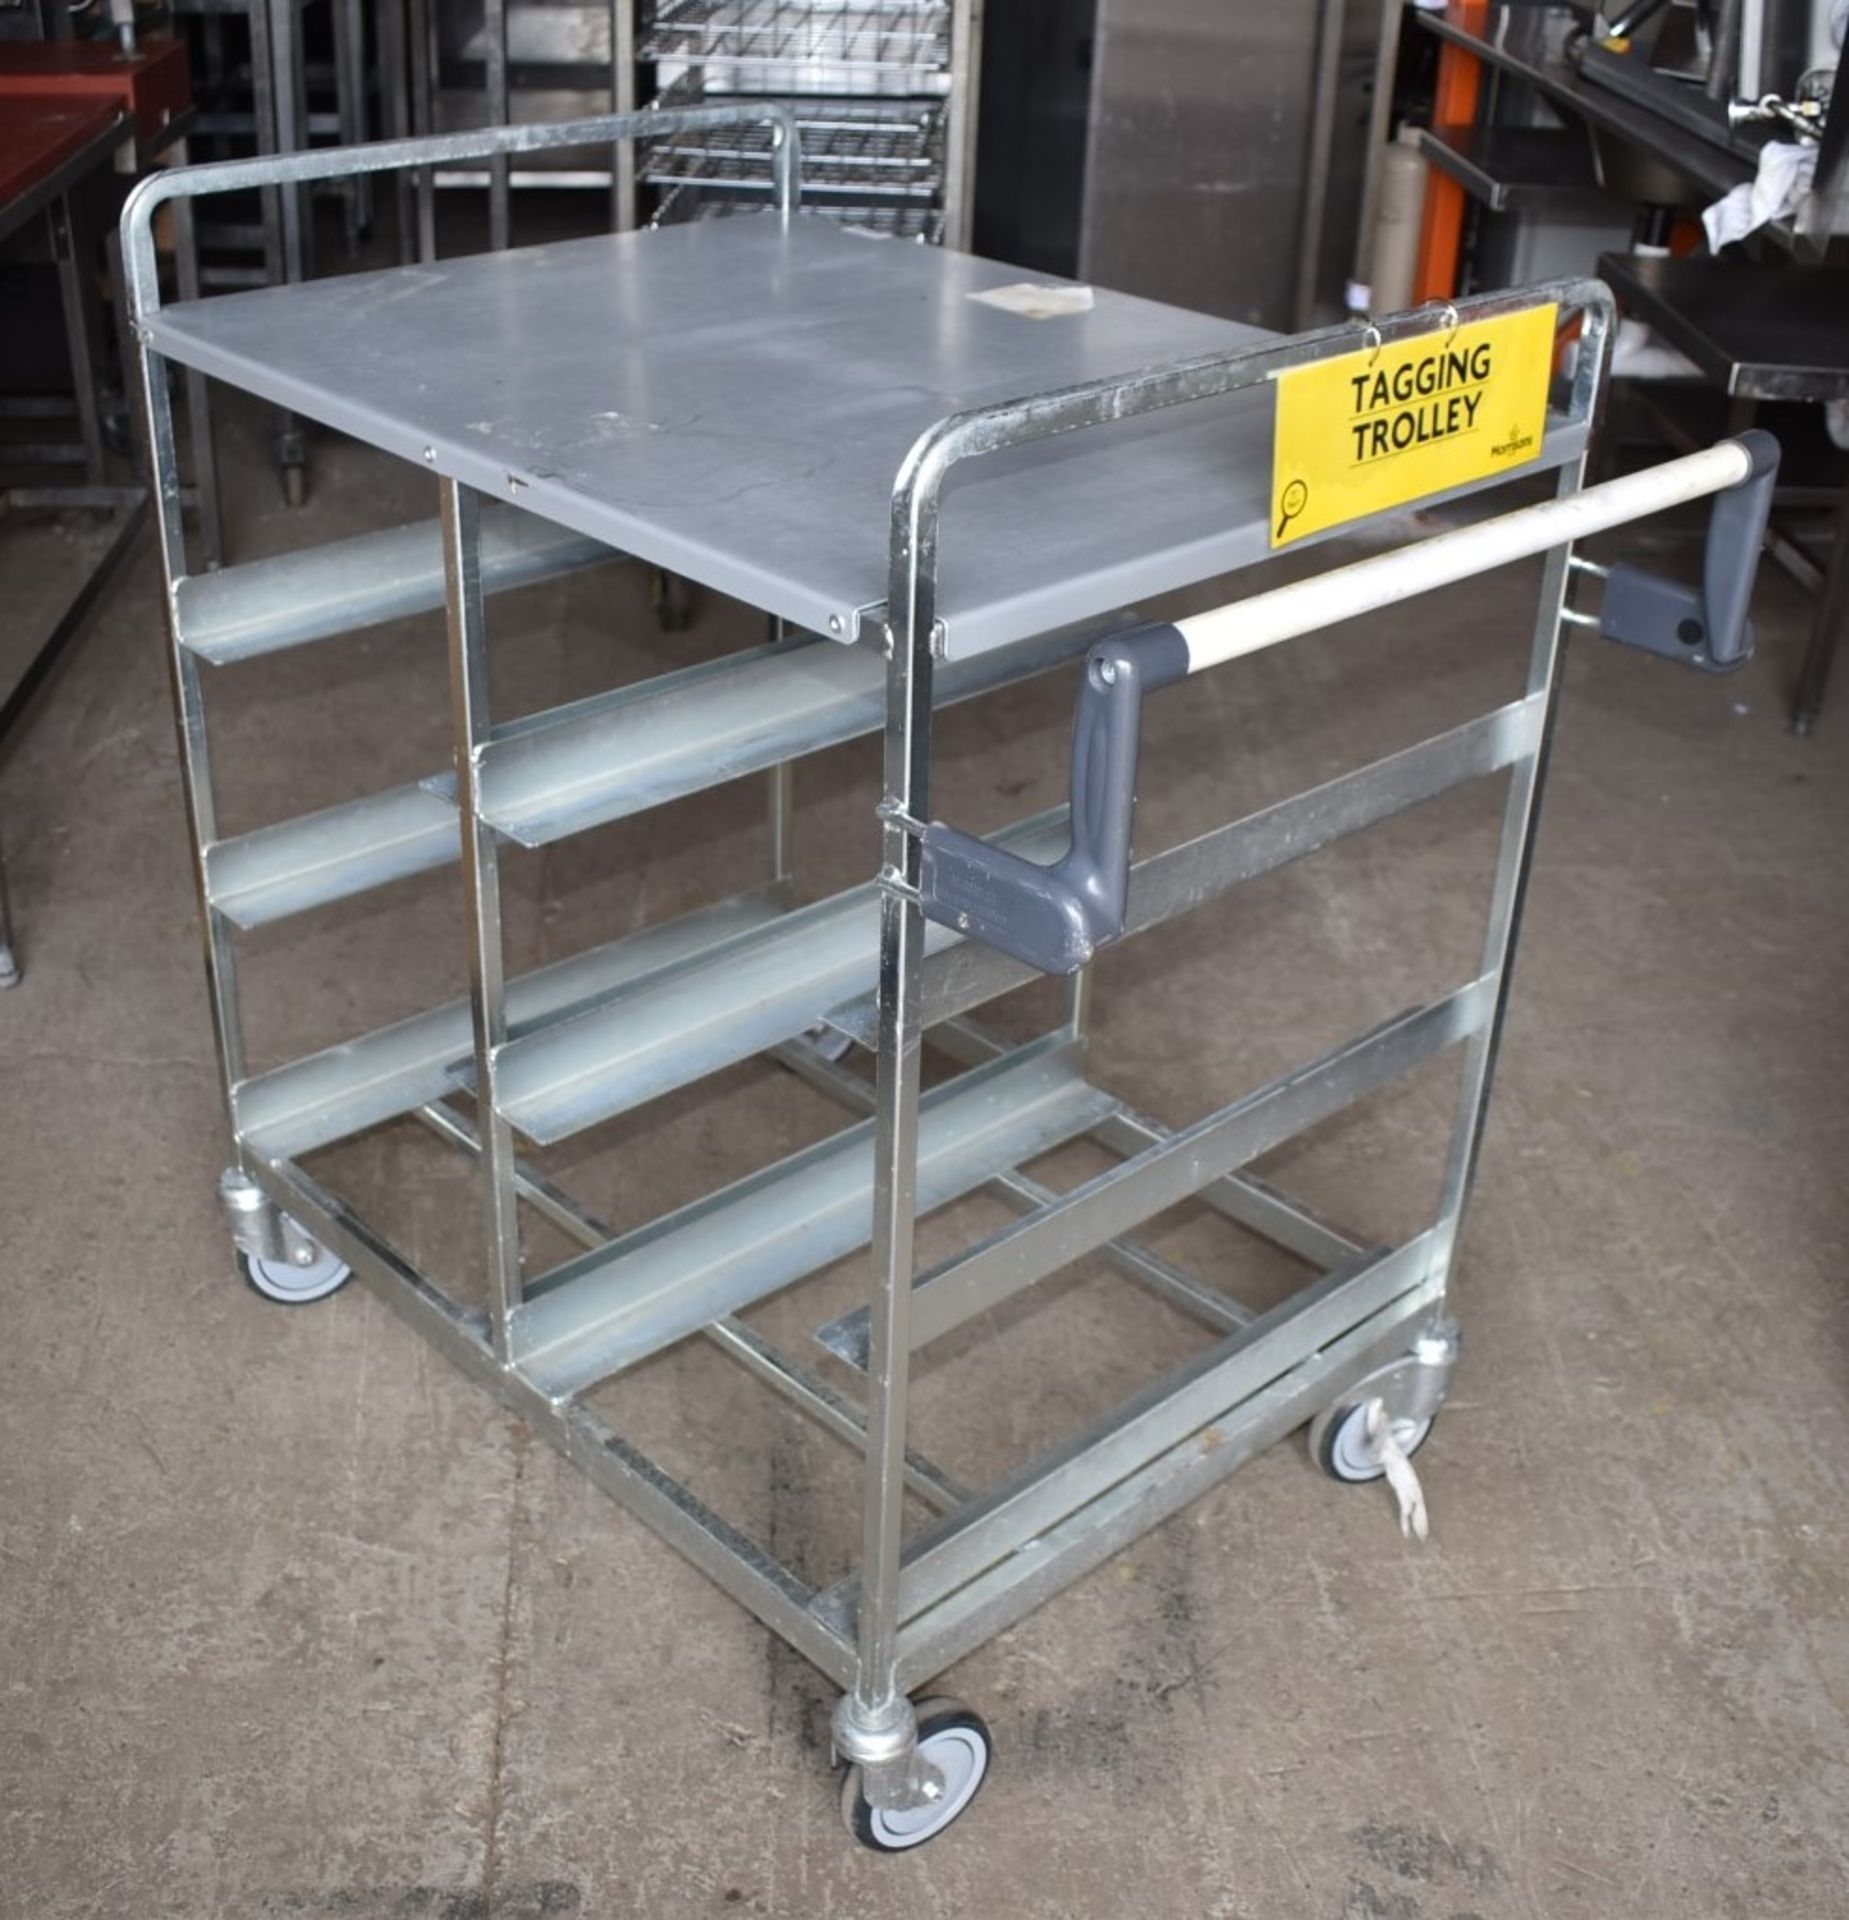 1 x Pickers Warehouse Trolley - Dimensions: H93 x W102 x D67 cms - Recently Removed From Major - Image 4 of 6